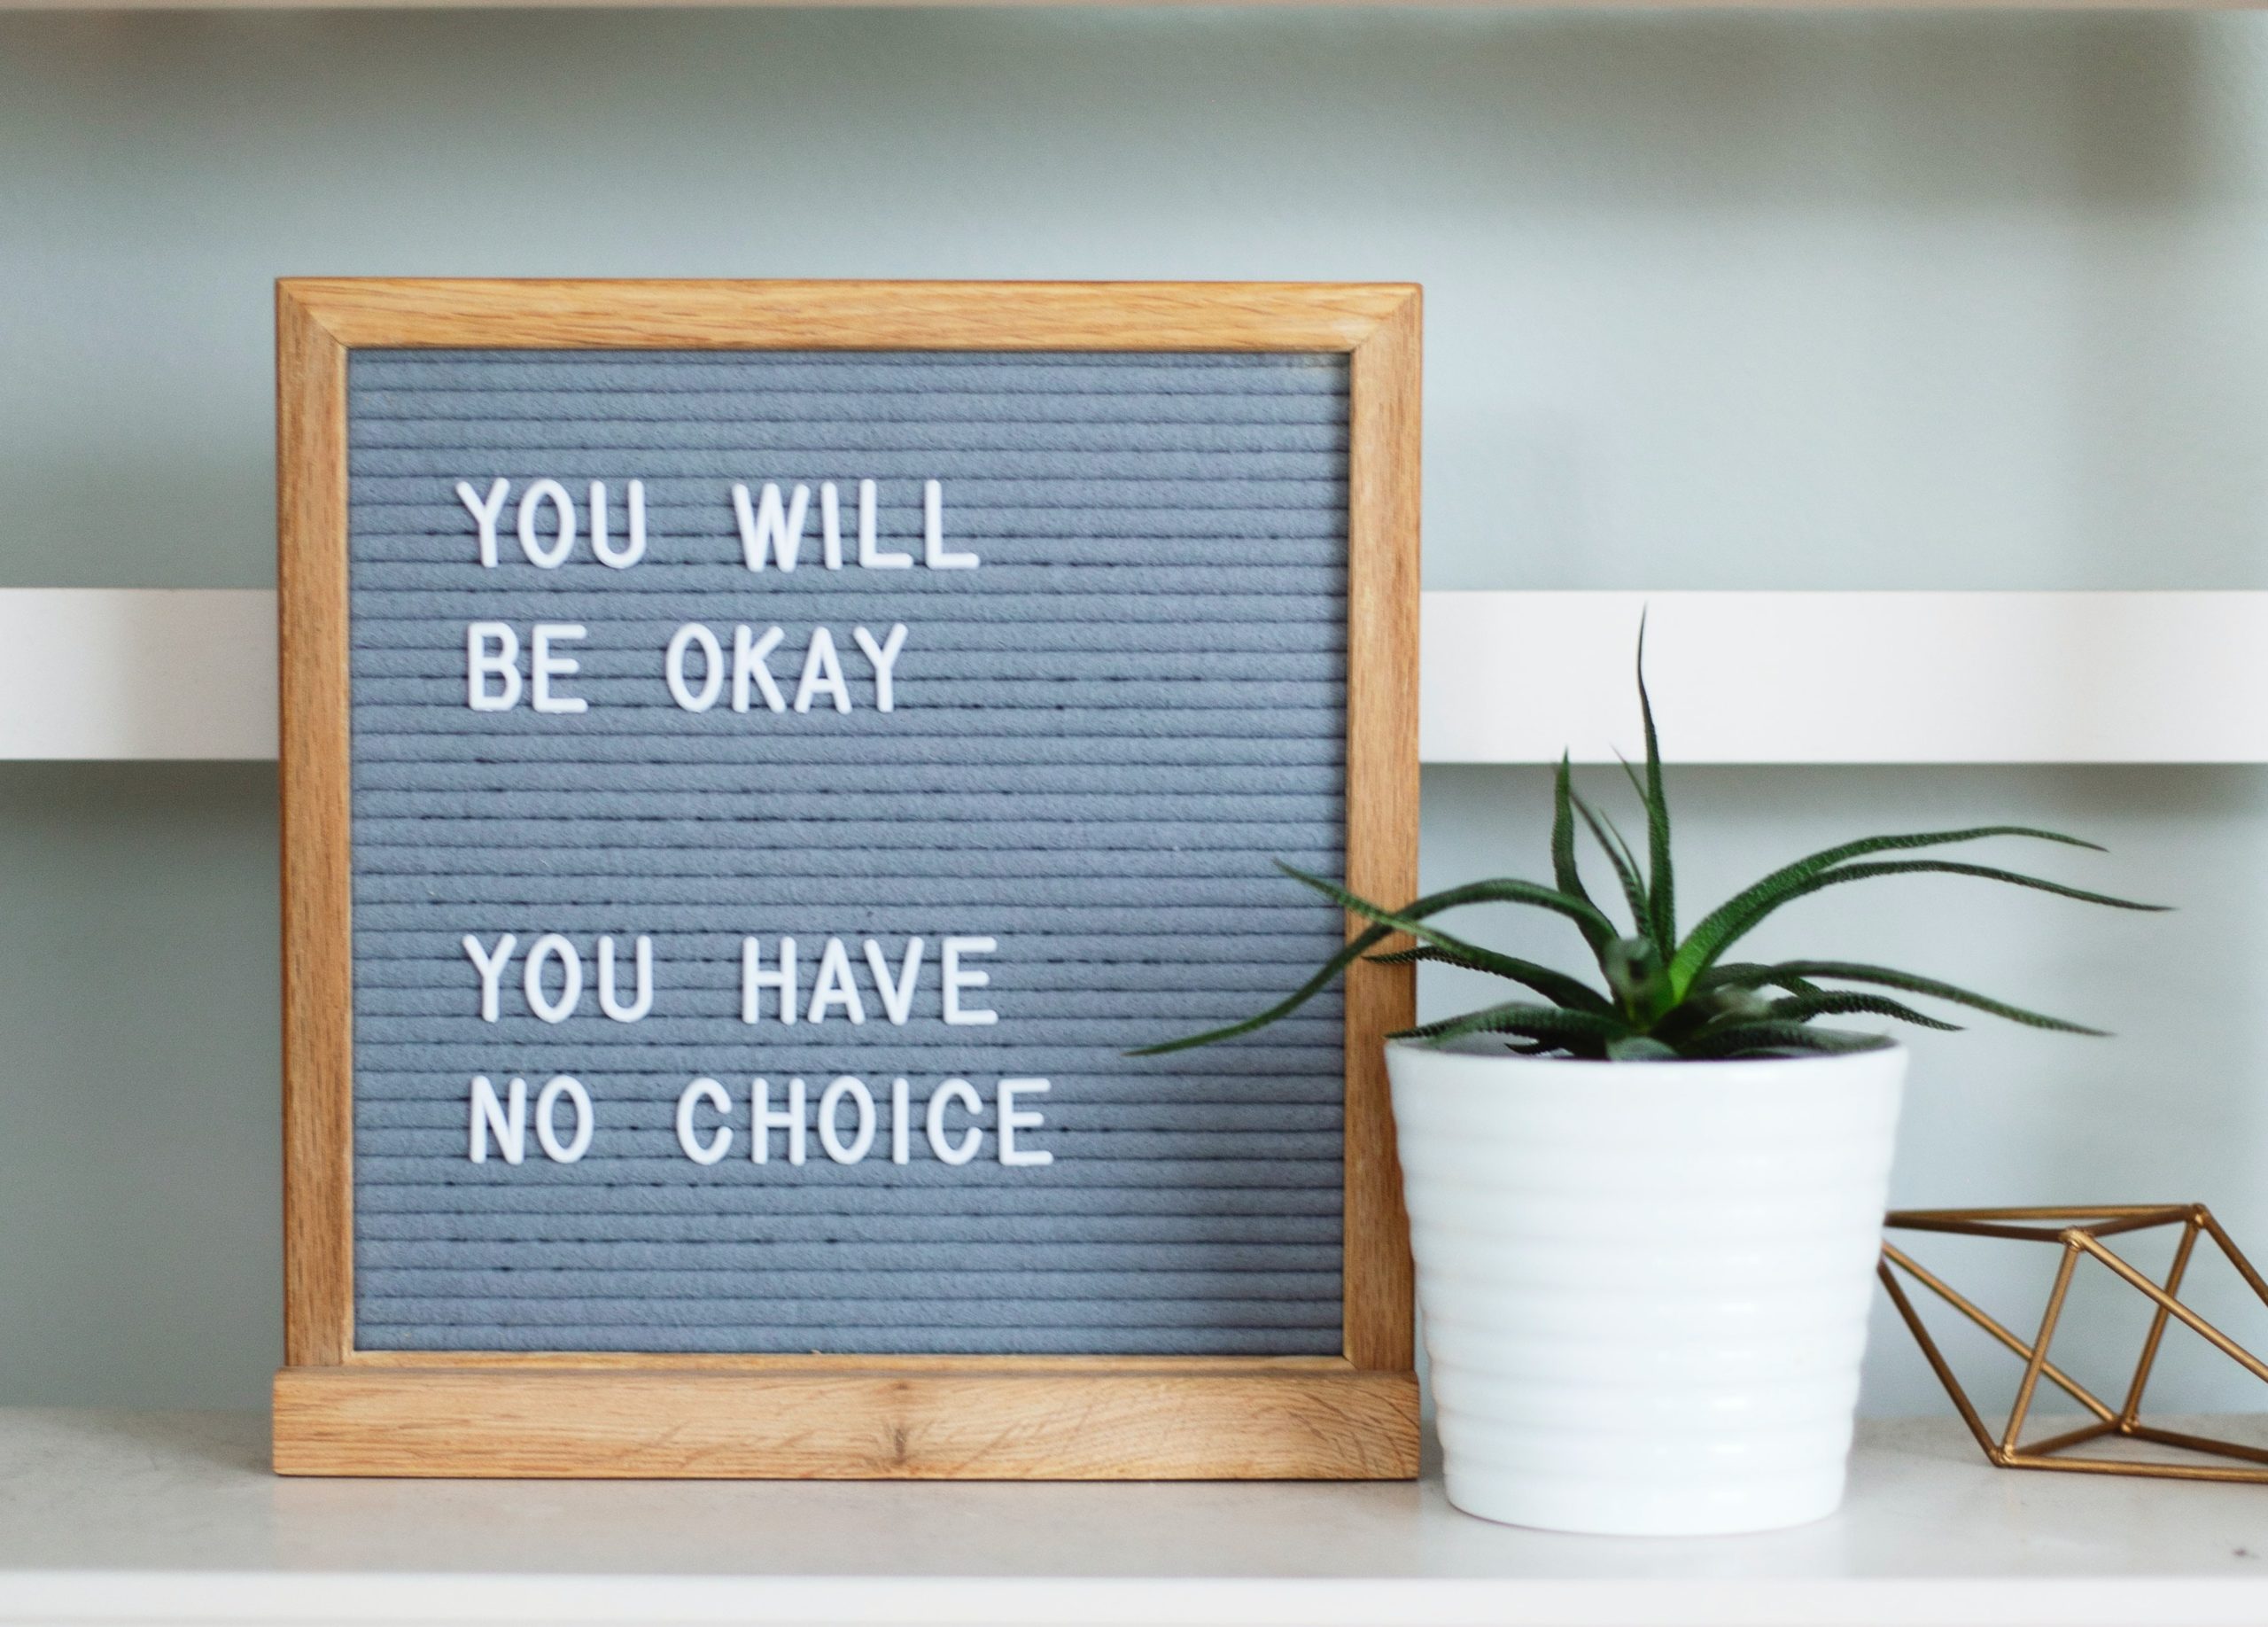 A gray board that reads "You will be okay. You have no choice." with a plant in a white pot next to it.